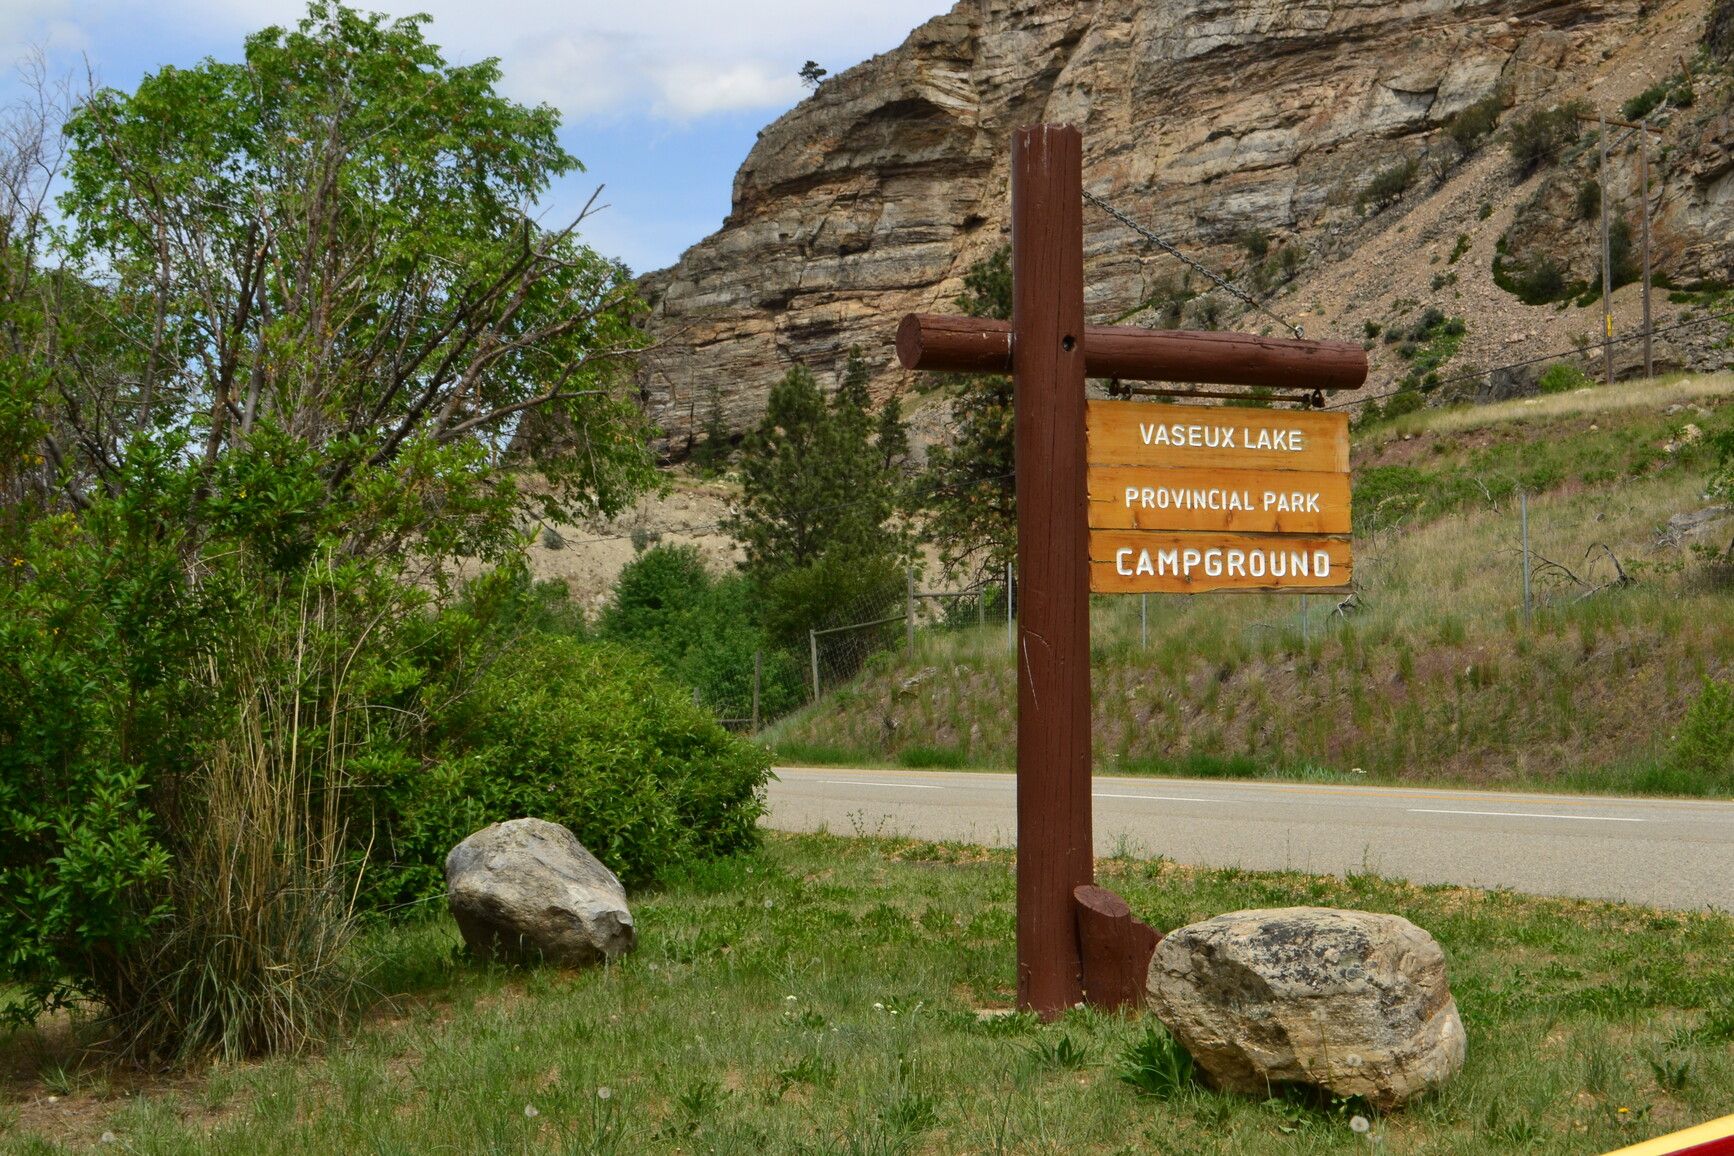 Set against the backdrop of rugged sedimentary rock formations on a mountain, the entrance sign of Vaseux Lake Park proudly welcomes visitors.